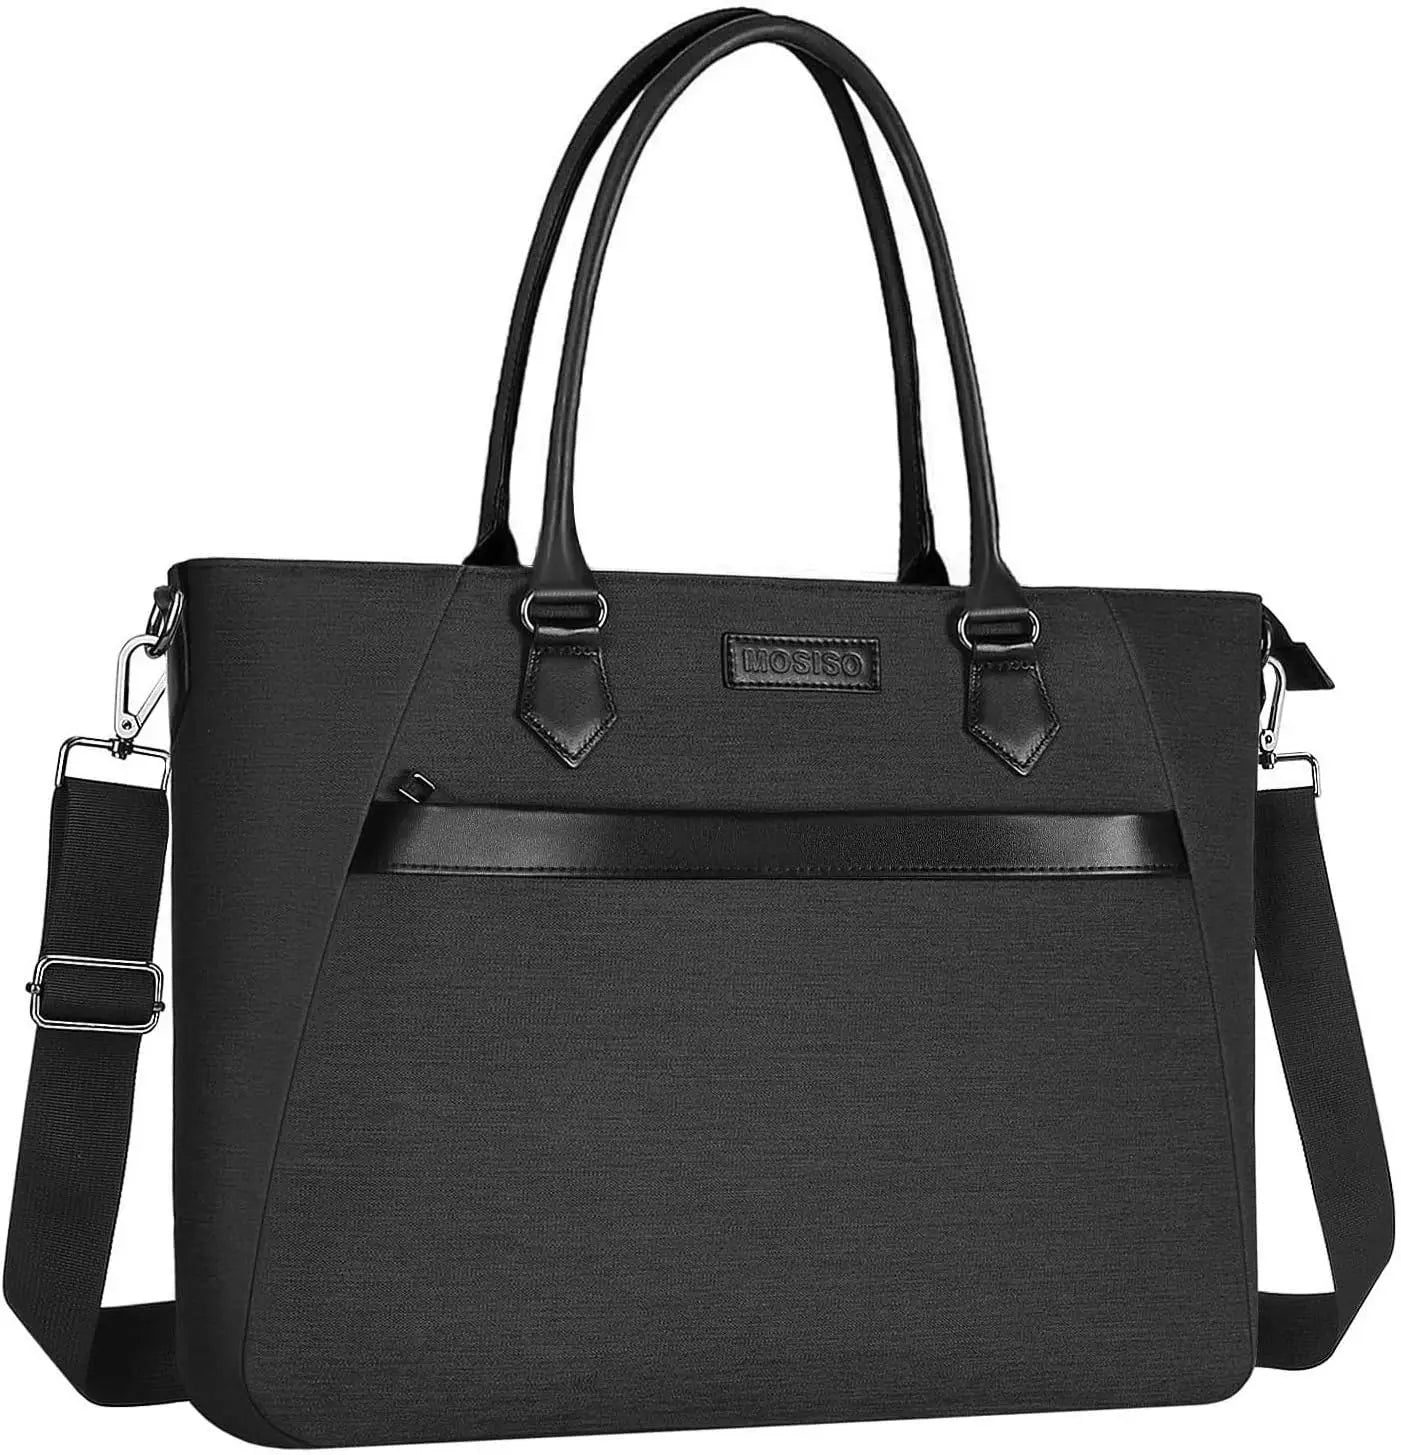 17 inch Laptop Tote The Store Bags 